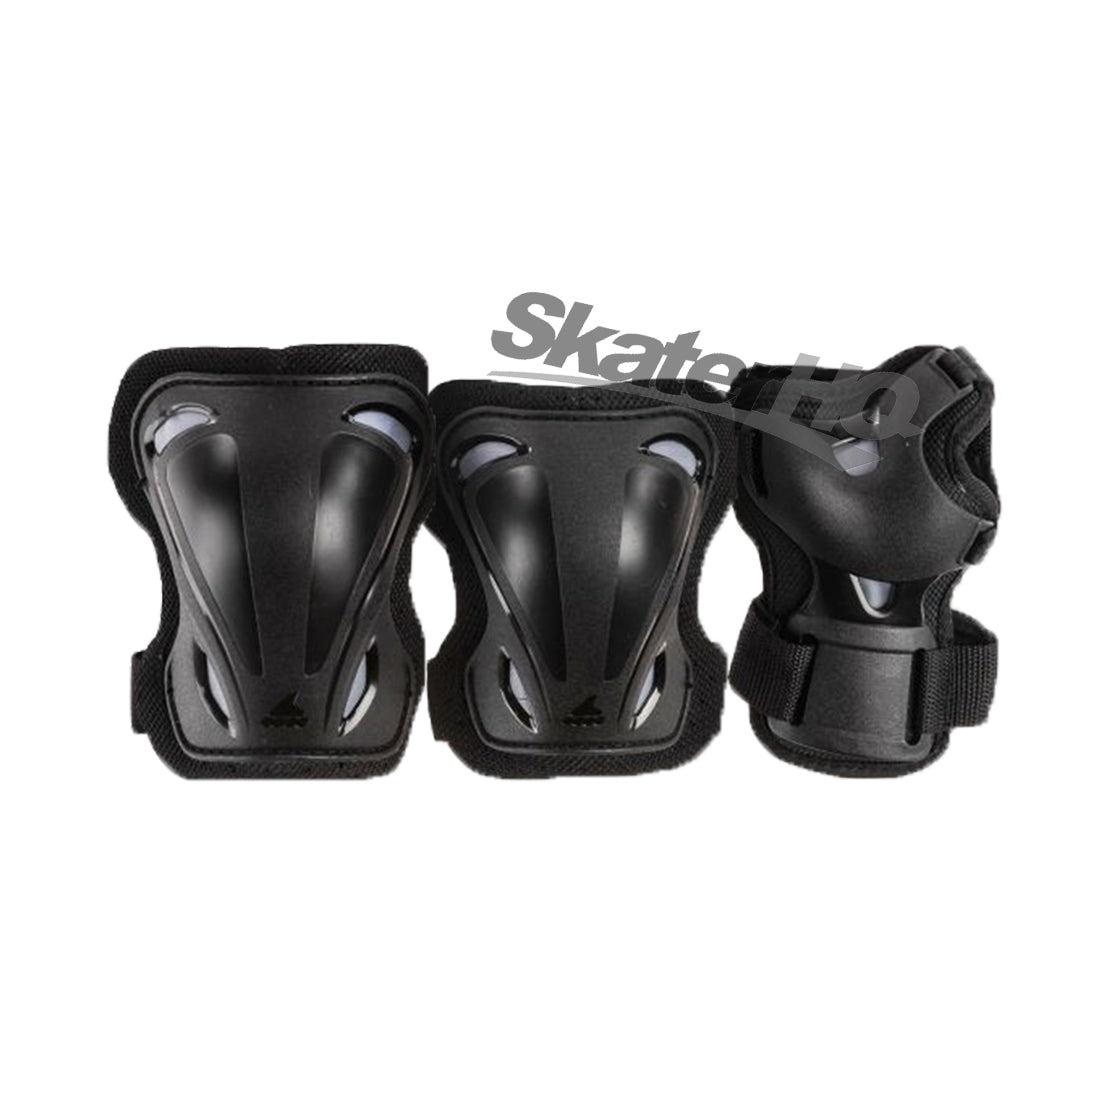 Rollerblade Skate Gear 3pk - Small Protective Gear